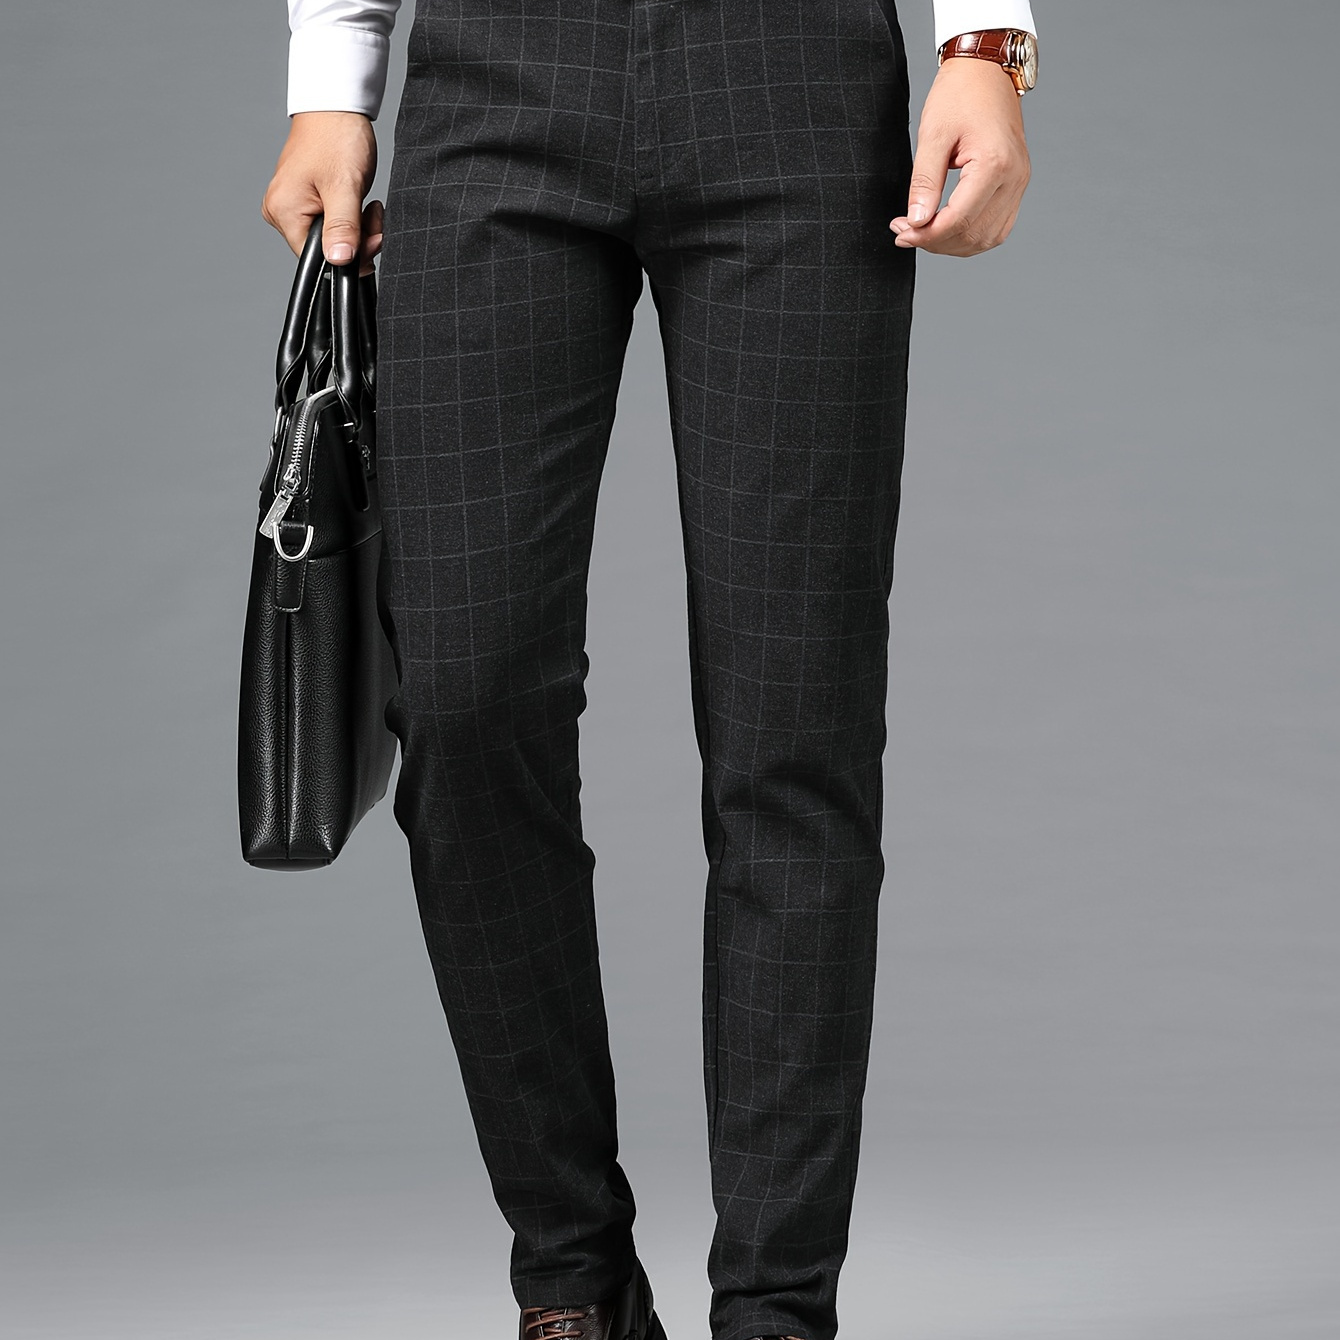 

Men's Premium Business Casual Plaid Pants, Stylish Slim Fit Dress Trousers, Lightweight Comfort For Office & Daily Wear